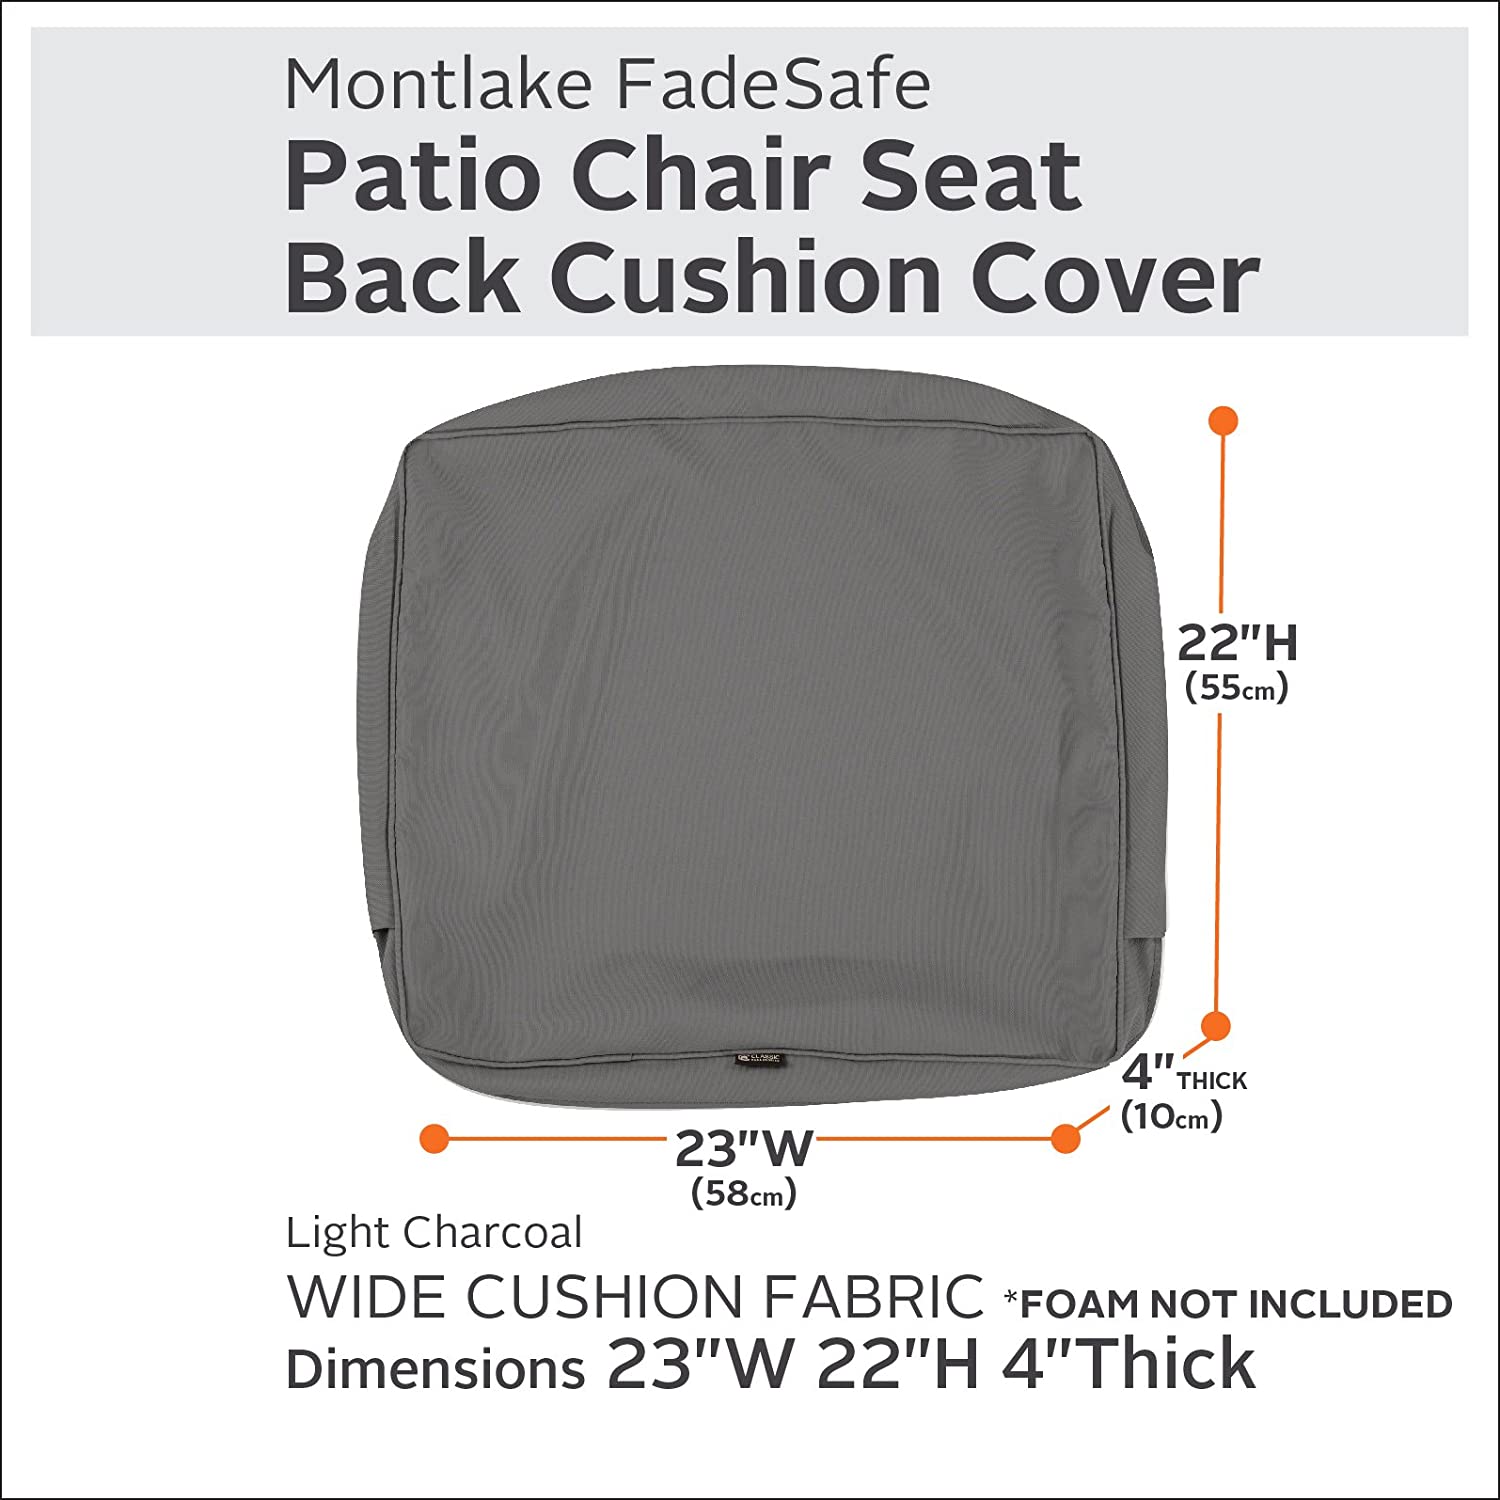 Classic Accessories Montlake Water-Resistant 23 x 22 x 4 Inch Outdoor Back Cushion Slip Cover, Patio Furniture Cushion Cover, Light Charcoal Grey, Patio Furniture Cushion Covers